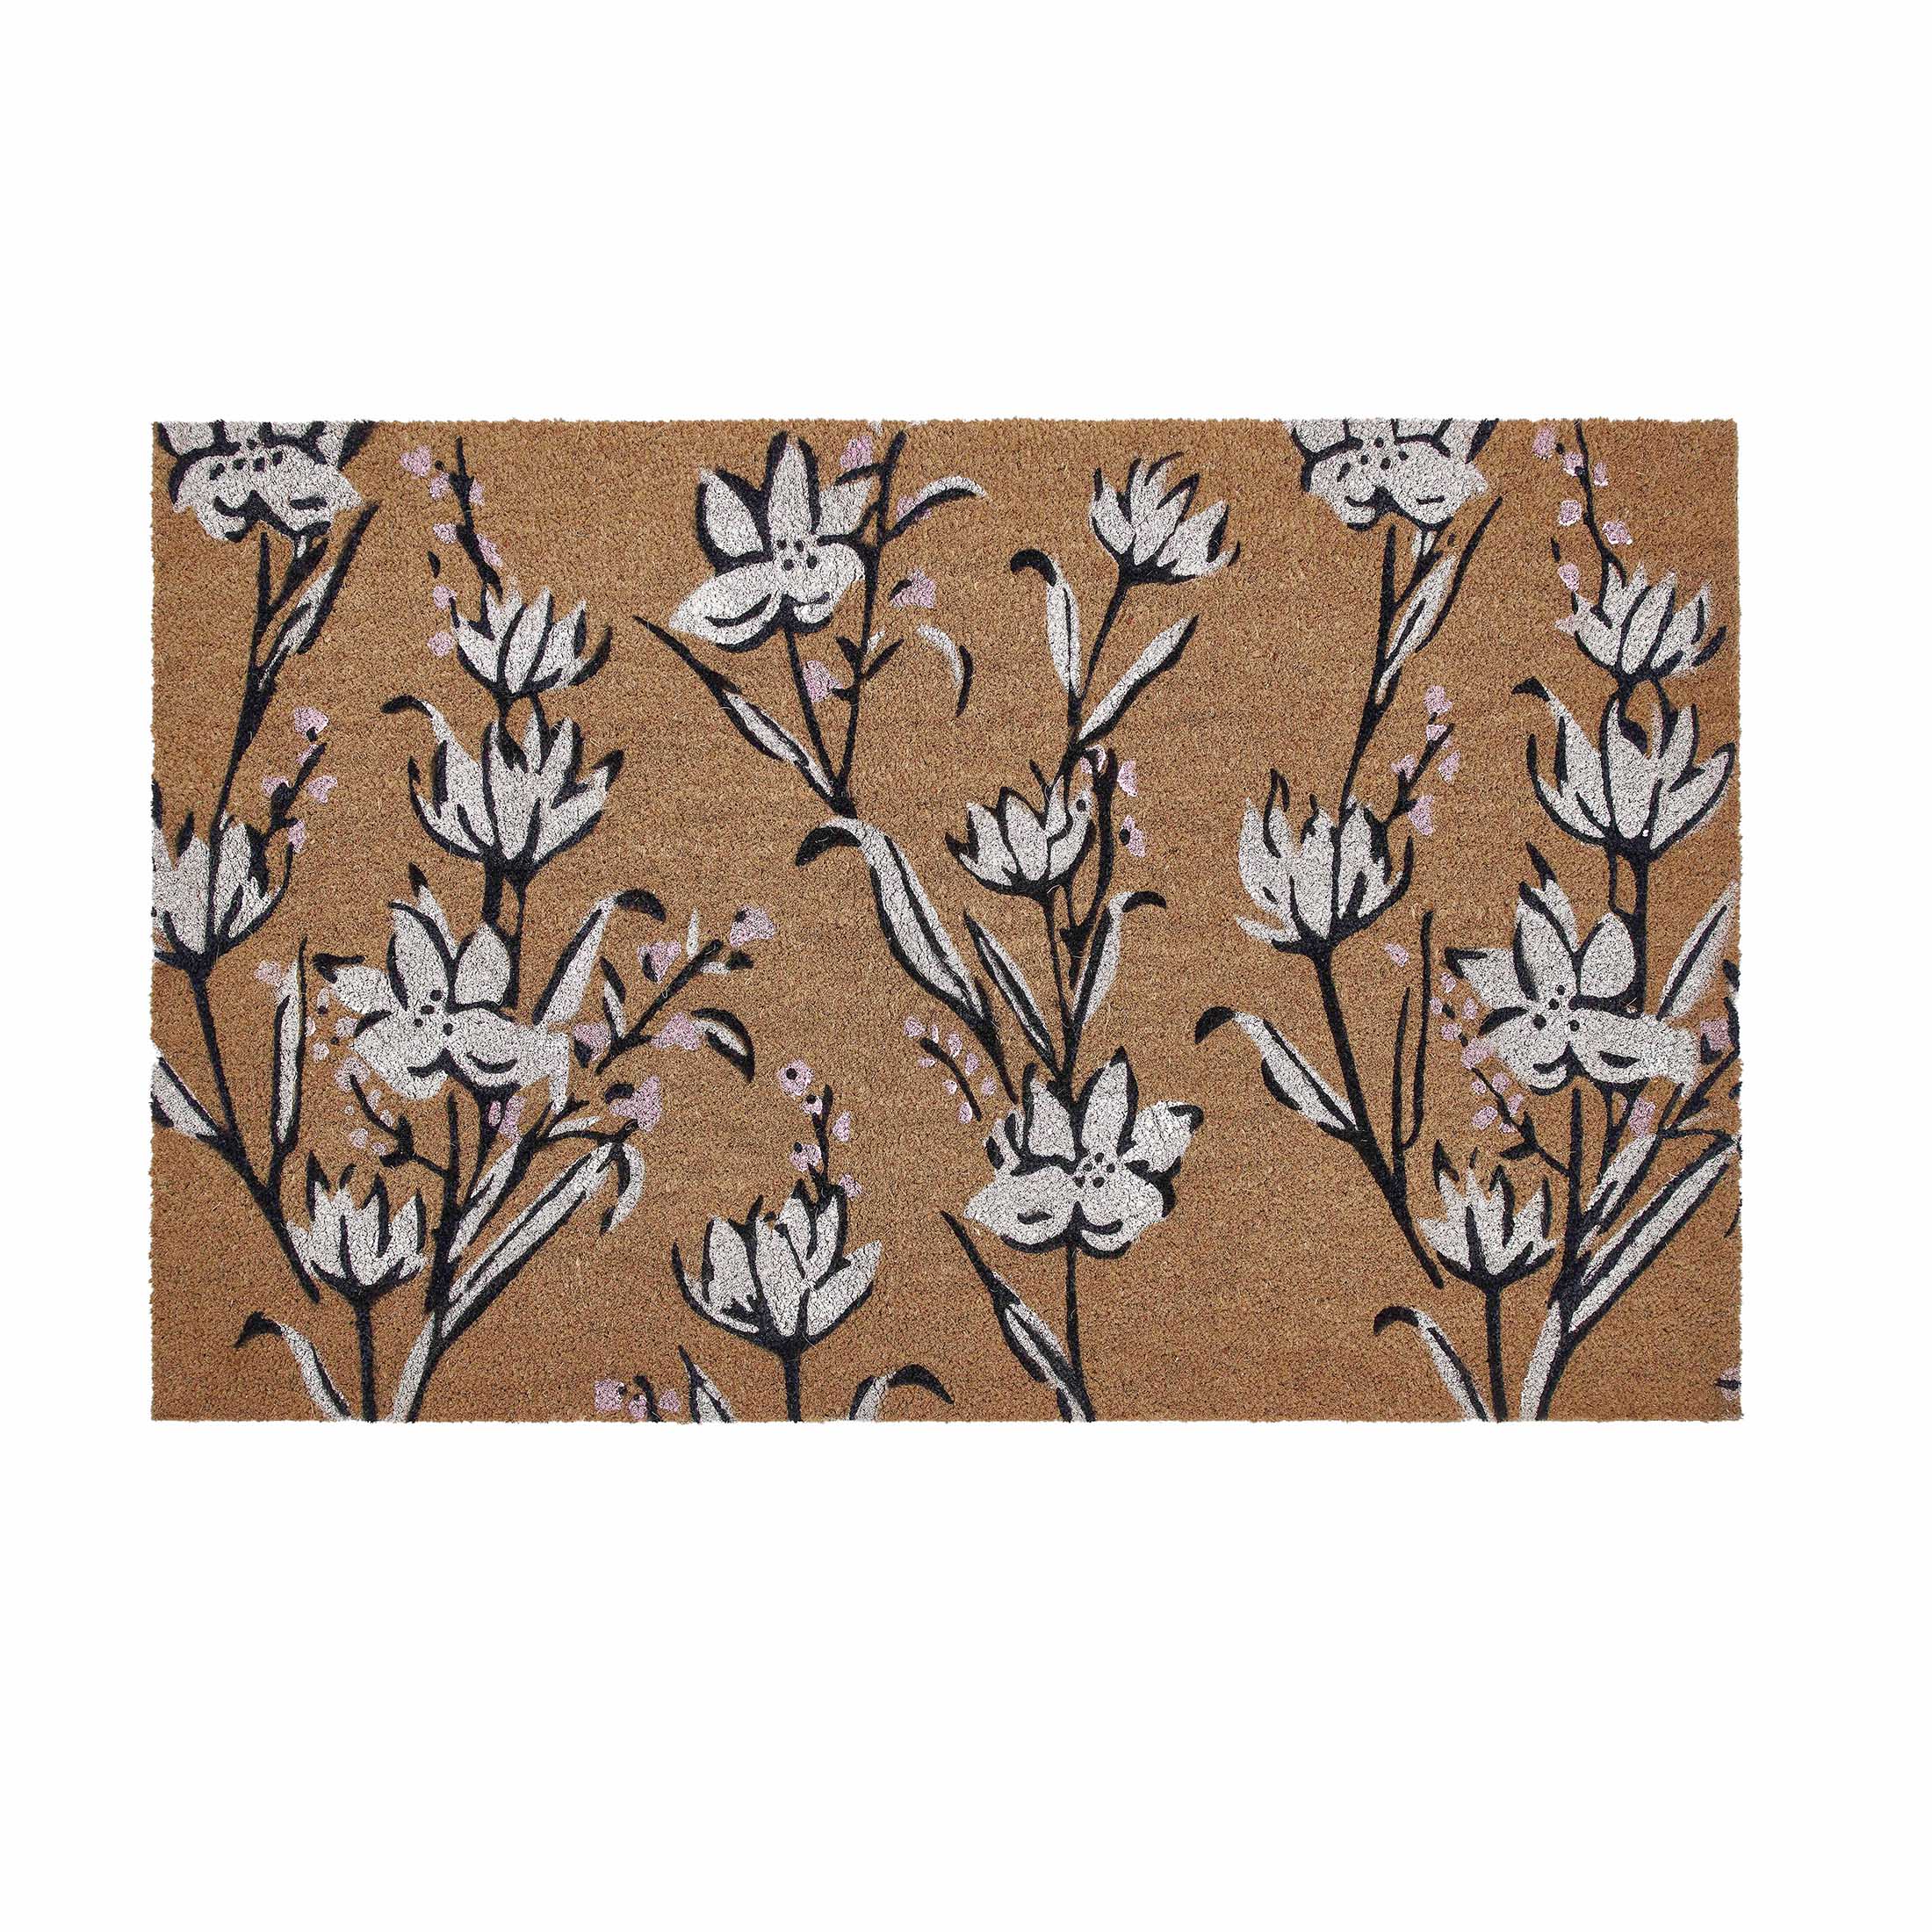 My Texas House Vertical Floral Natural/White Outdoor Coir Doormat, 18" x 30" - image 1 of 5